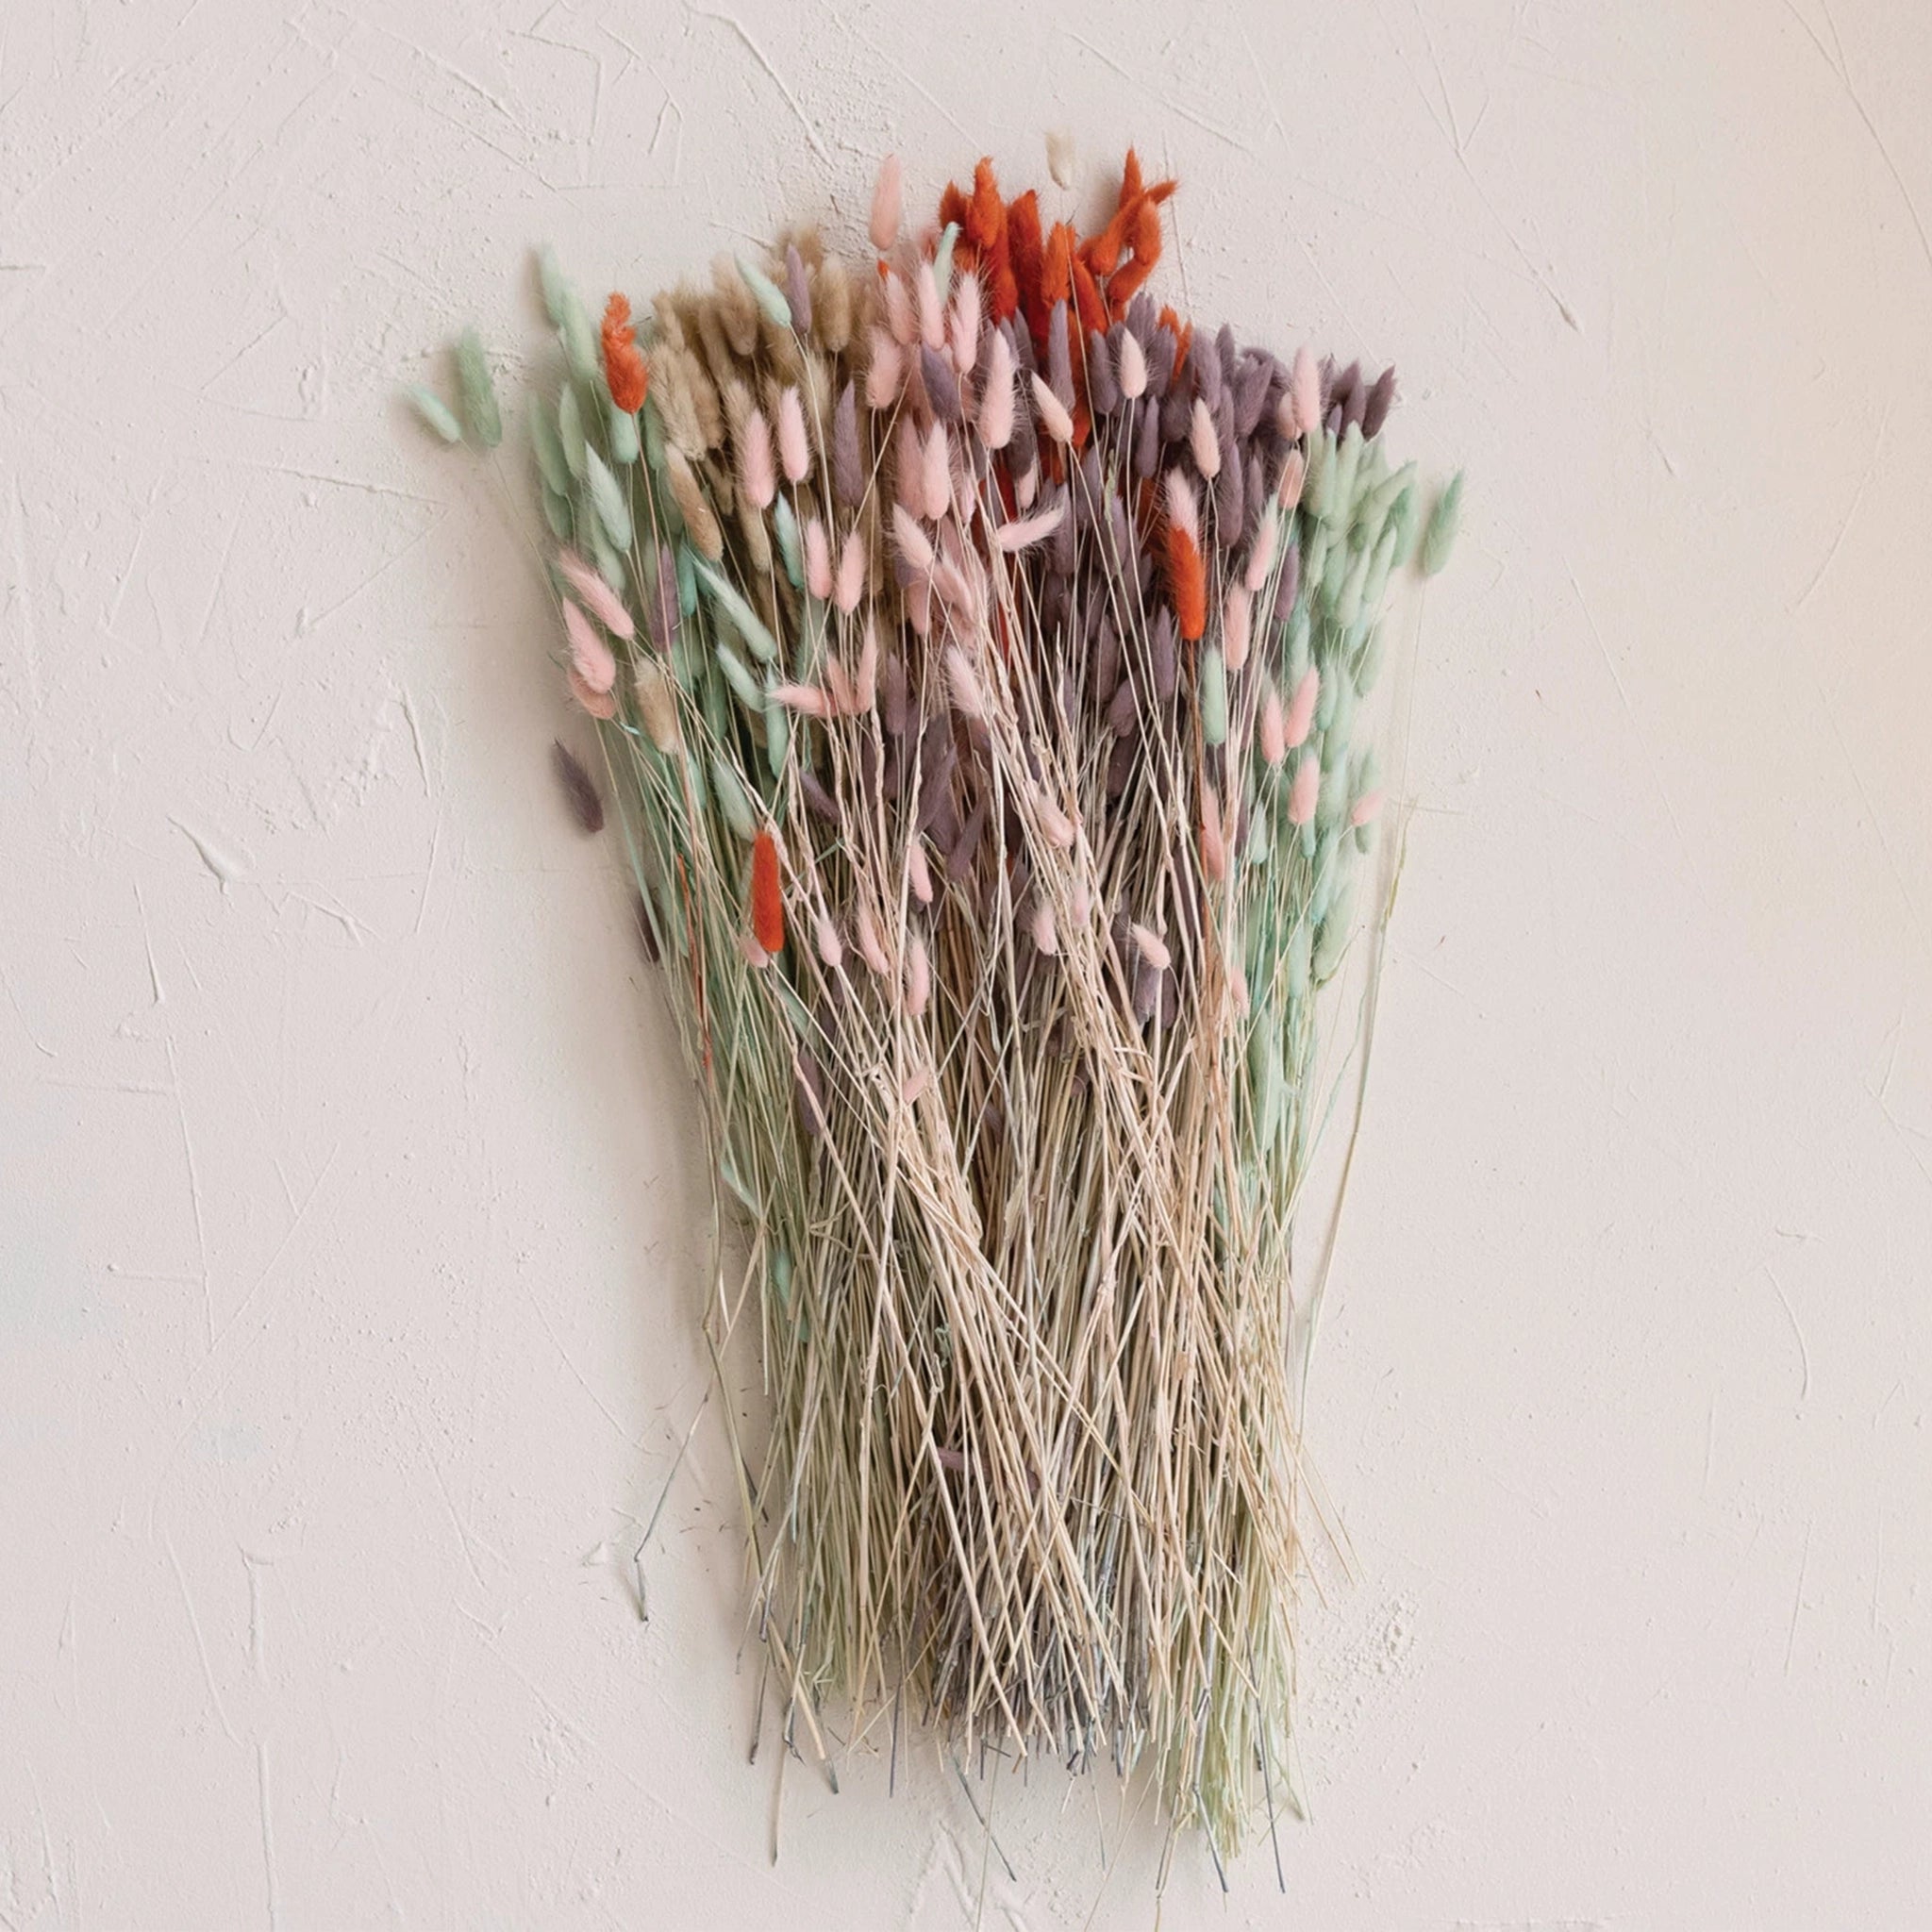 A bundle of light pink dried bunny tail with long stems photographed with with the other colors available on our website in lavender, natural and mint.